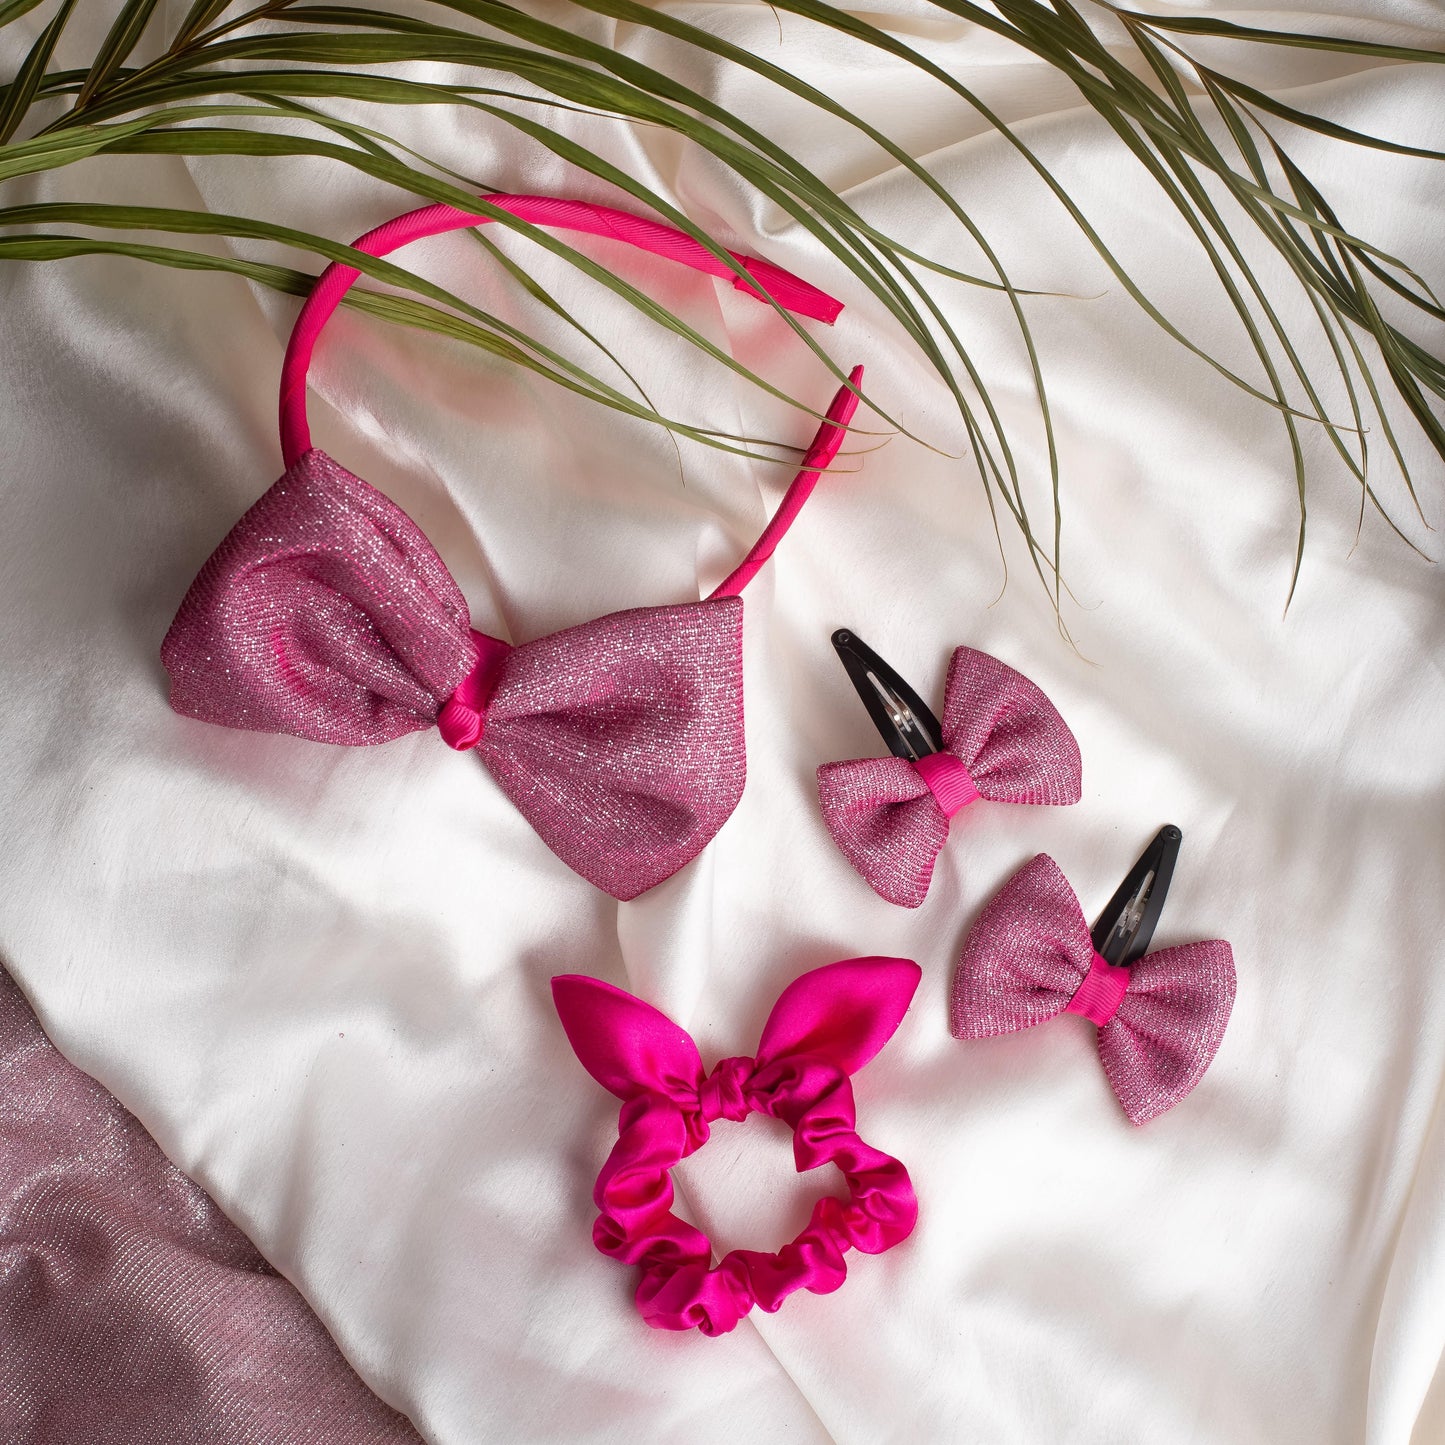 Ribbon Candy- Combo of 1 big bow shiny hairband, 1 pair of shiny bow tic-tac (2 nos), and 1 satin scrunchie with tie knot- Pink